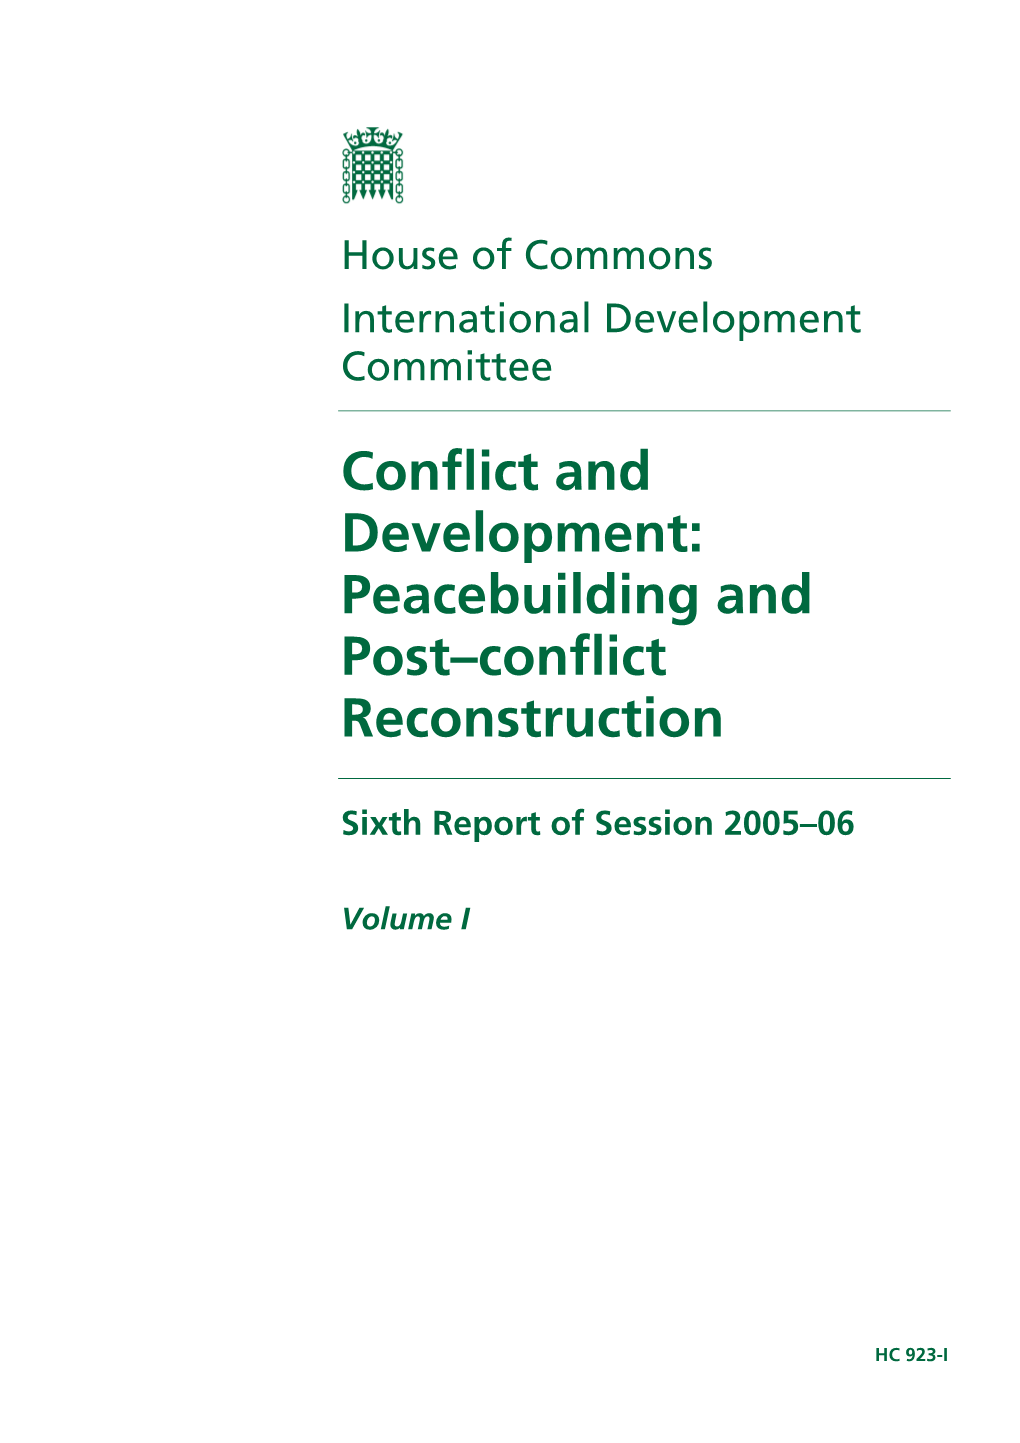 Peacebuilding and Post–Conflict Reconstruction